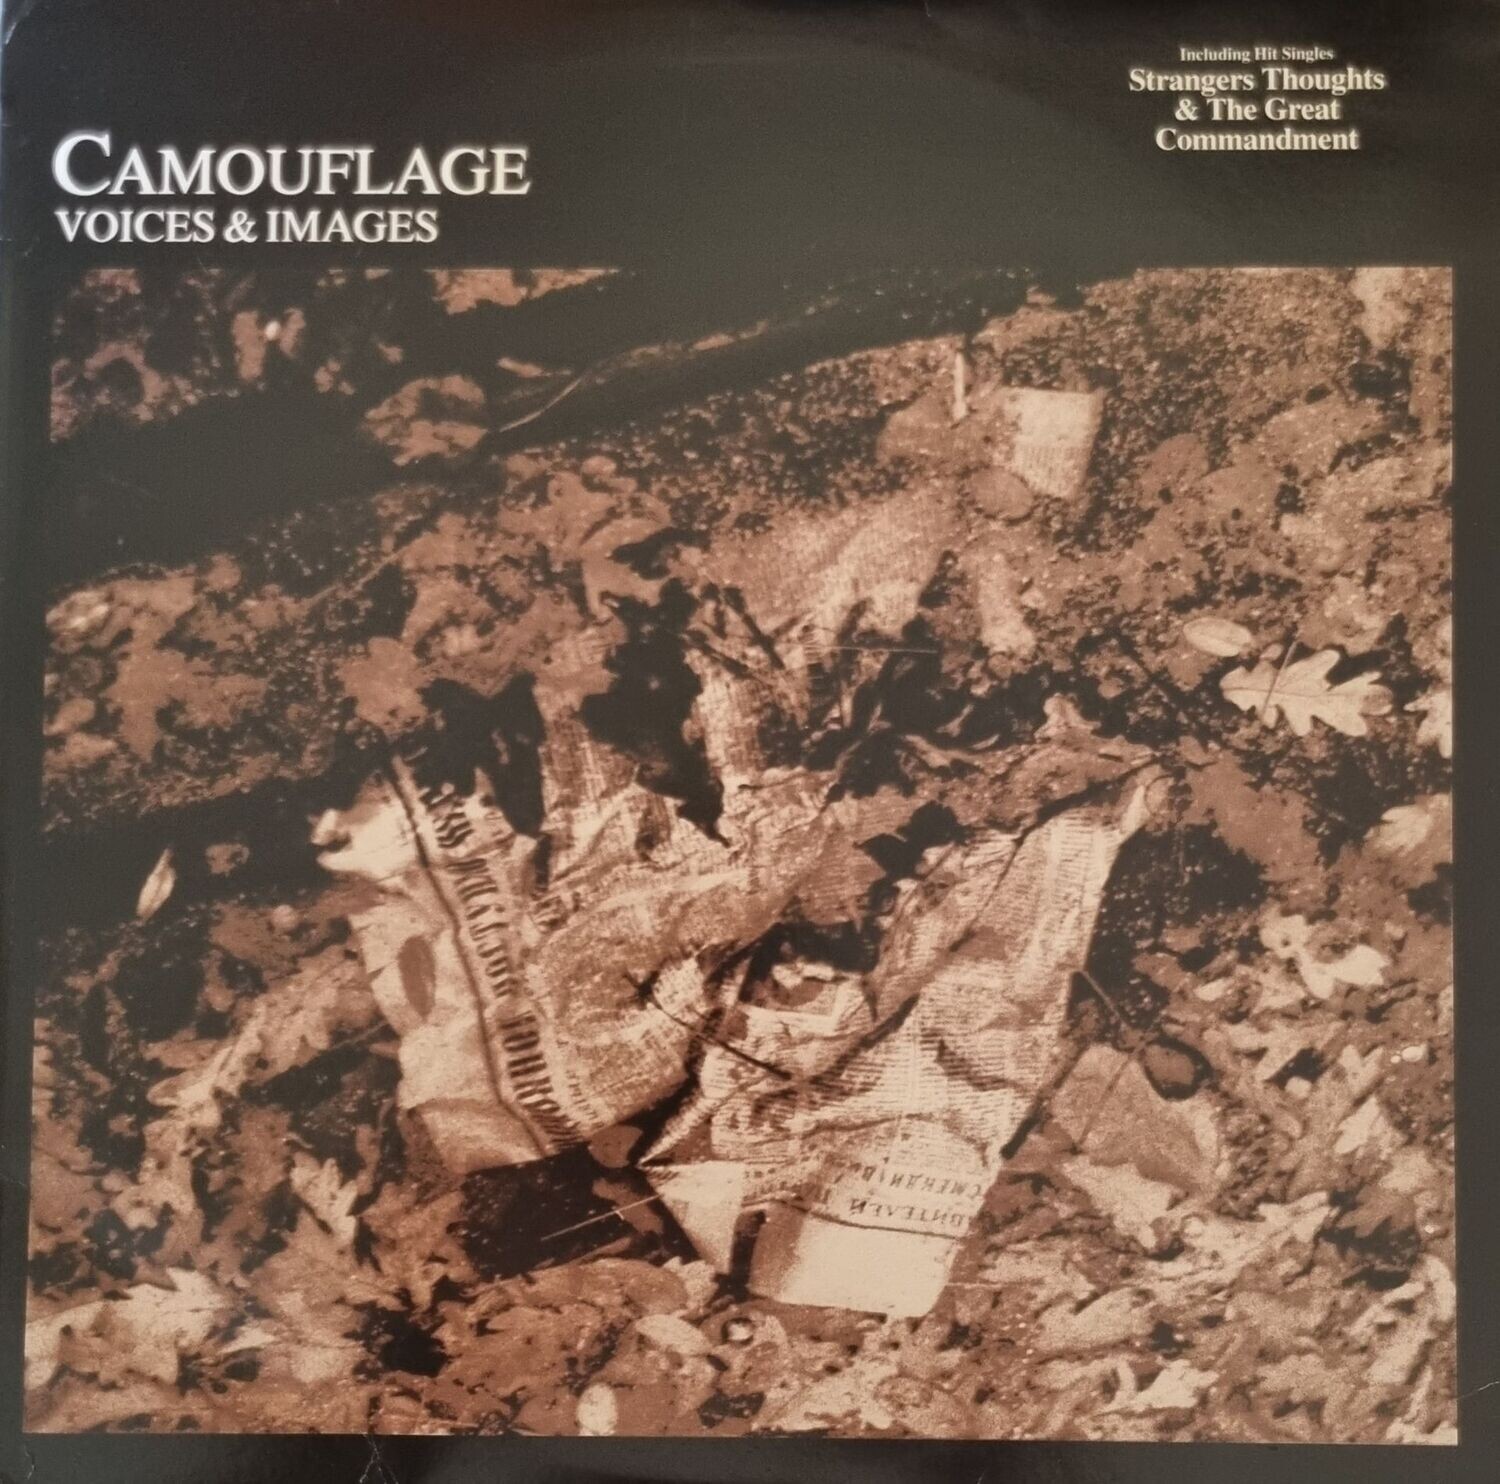 Camouflage – Voices & Images (1988)